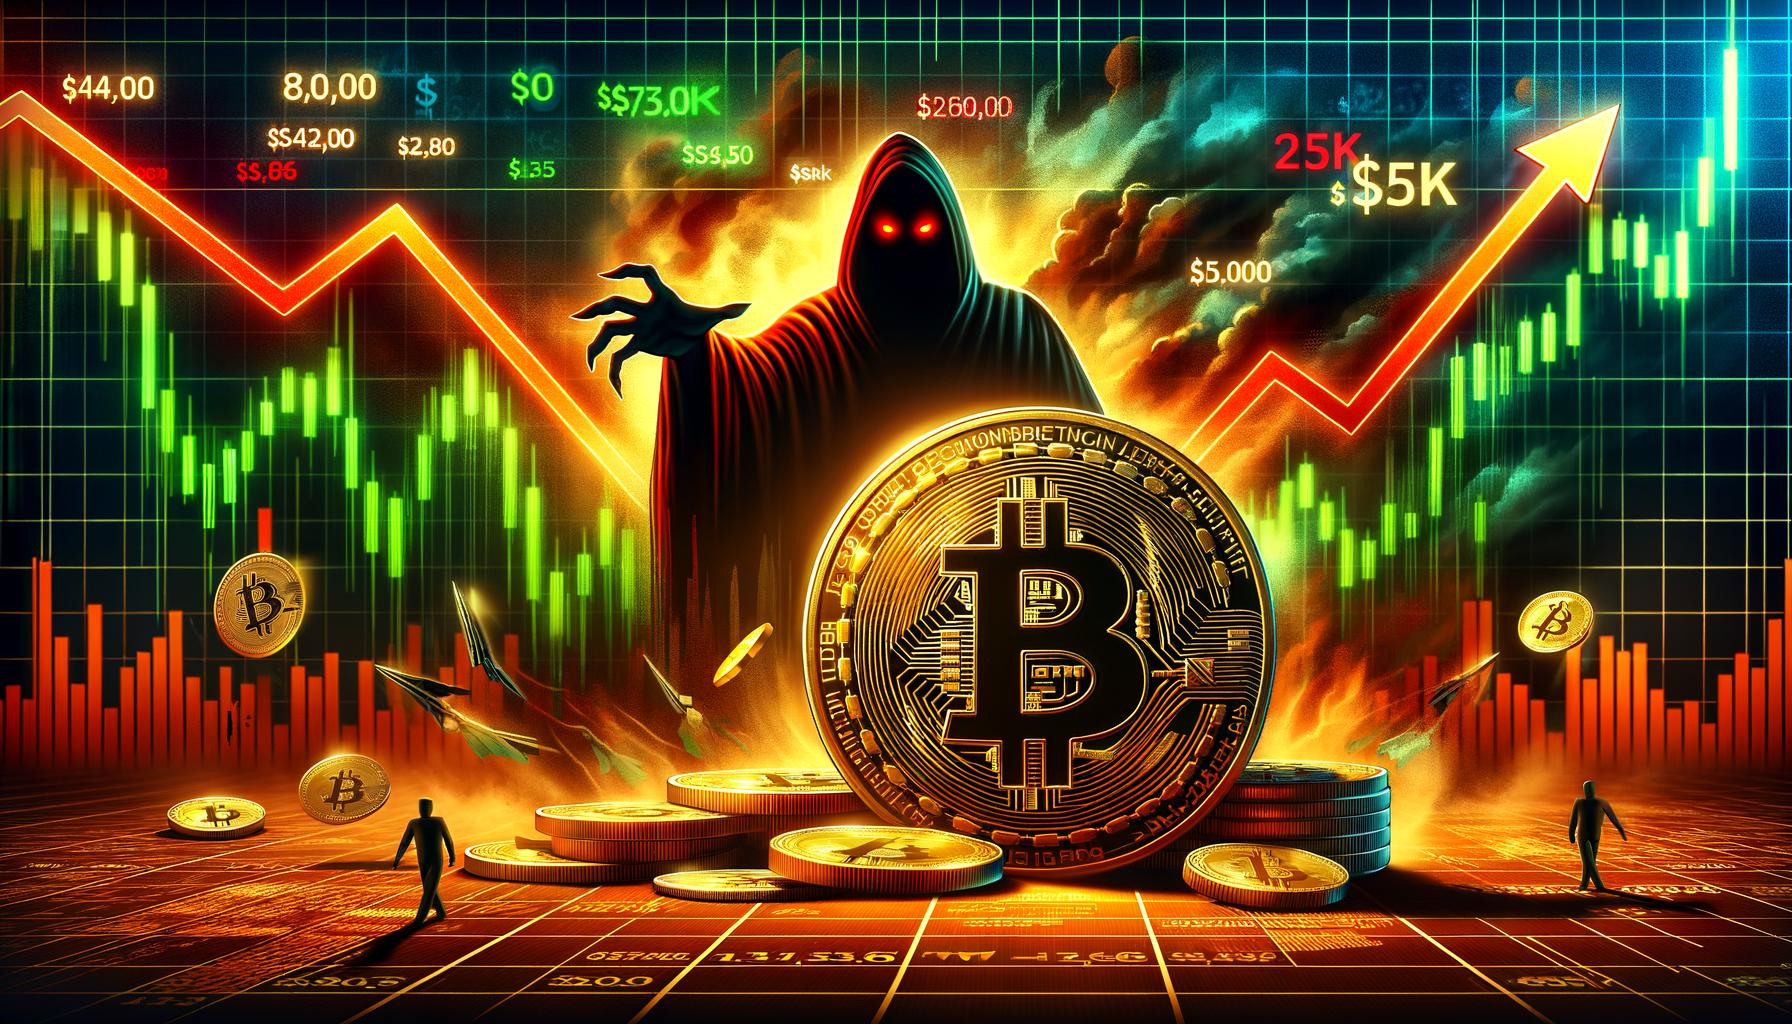 Bitcoin Price Turns Red: Risk of More Losses as $55K Test Looms